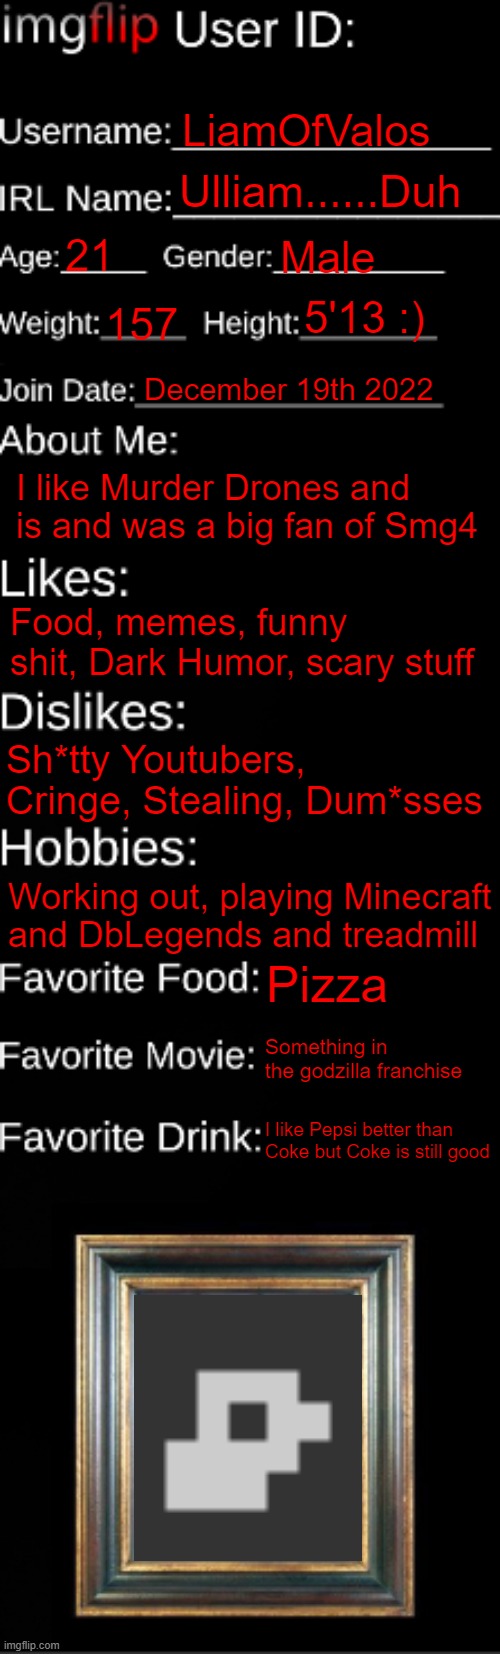 All true and I like pepsi like 20% better than coke | LiamOfValos; Ulliam......Duh; 21; Male; 5'13 :); 157; December 19th 2022; I like Murder Drones and is and was a big fan of Smg4; Food, memes, funny shit, Dark Humor, scary stuff; Sh*tty Youtubers, Cringe, Stealing, Dum*sses; Working out, playing Minecraft and DbLegends and treadmill; Pizza; Something in the godzilla franchise; I like Pepsi better than Coke but Coke is still good | image tagged in imgflip id card,liamofvalos | made w/ Imgflip meme maker